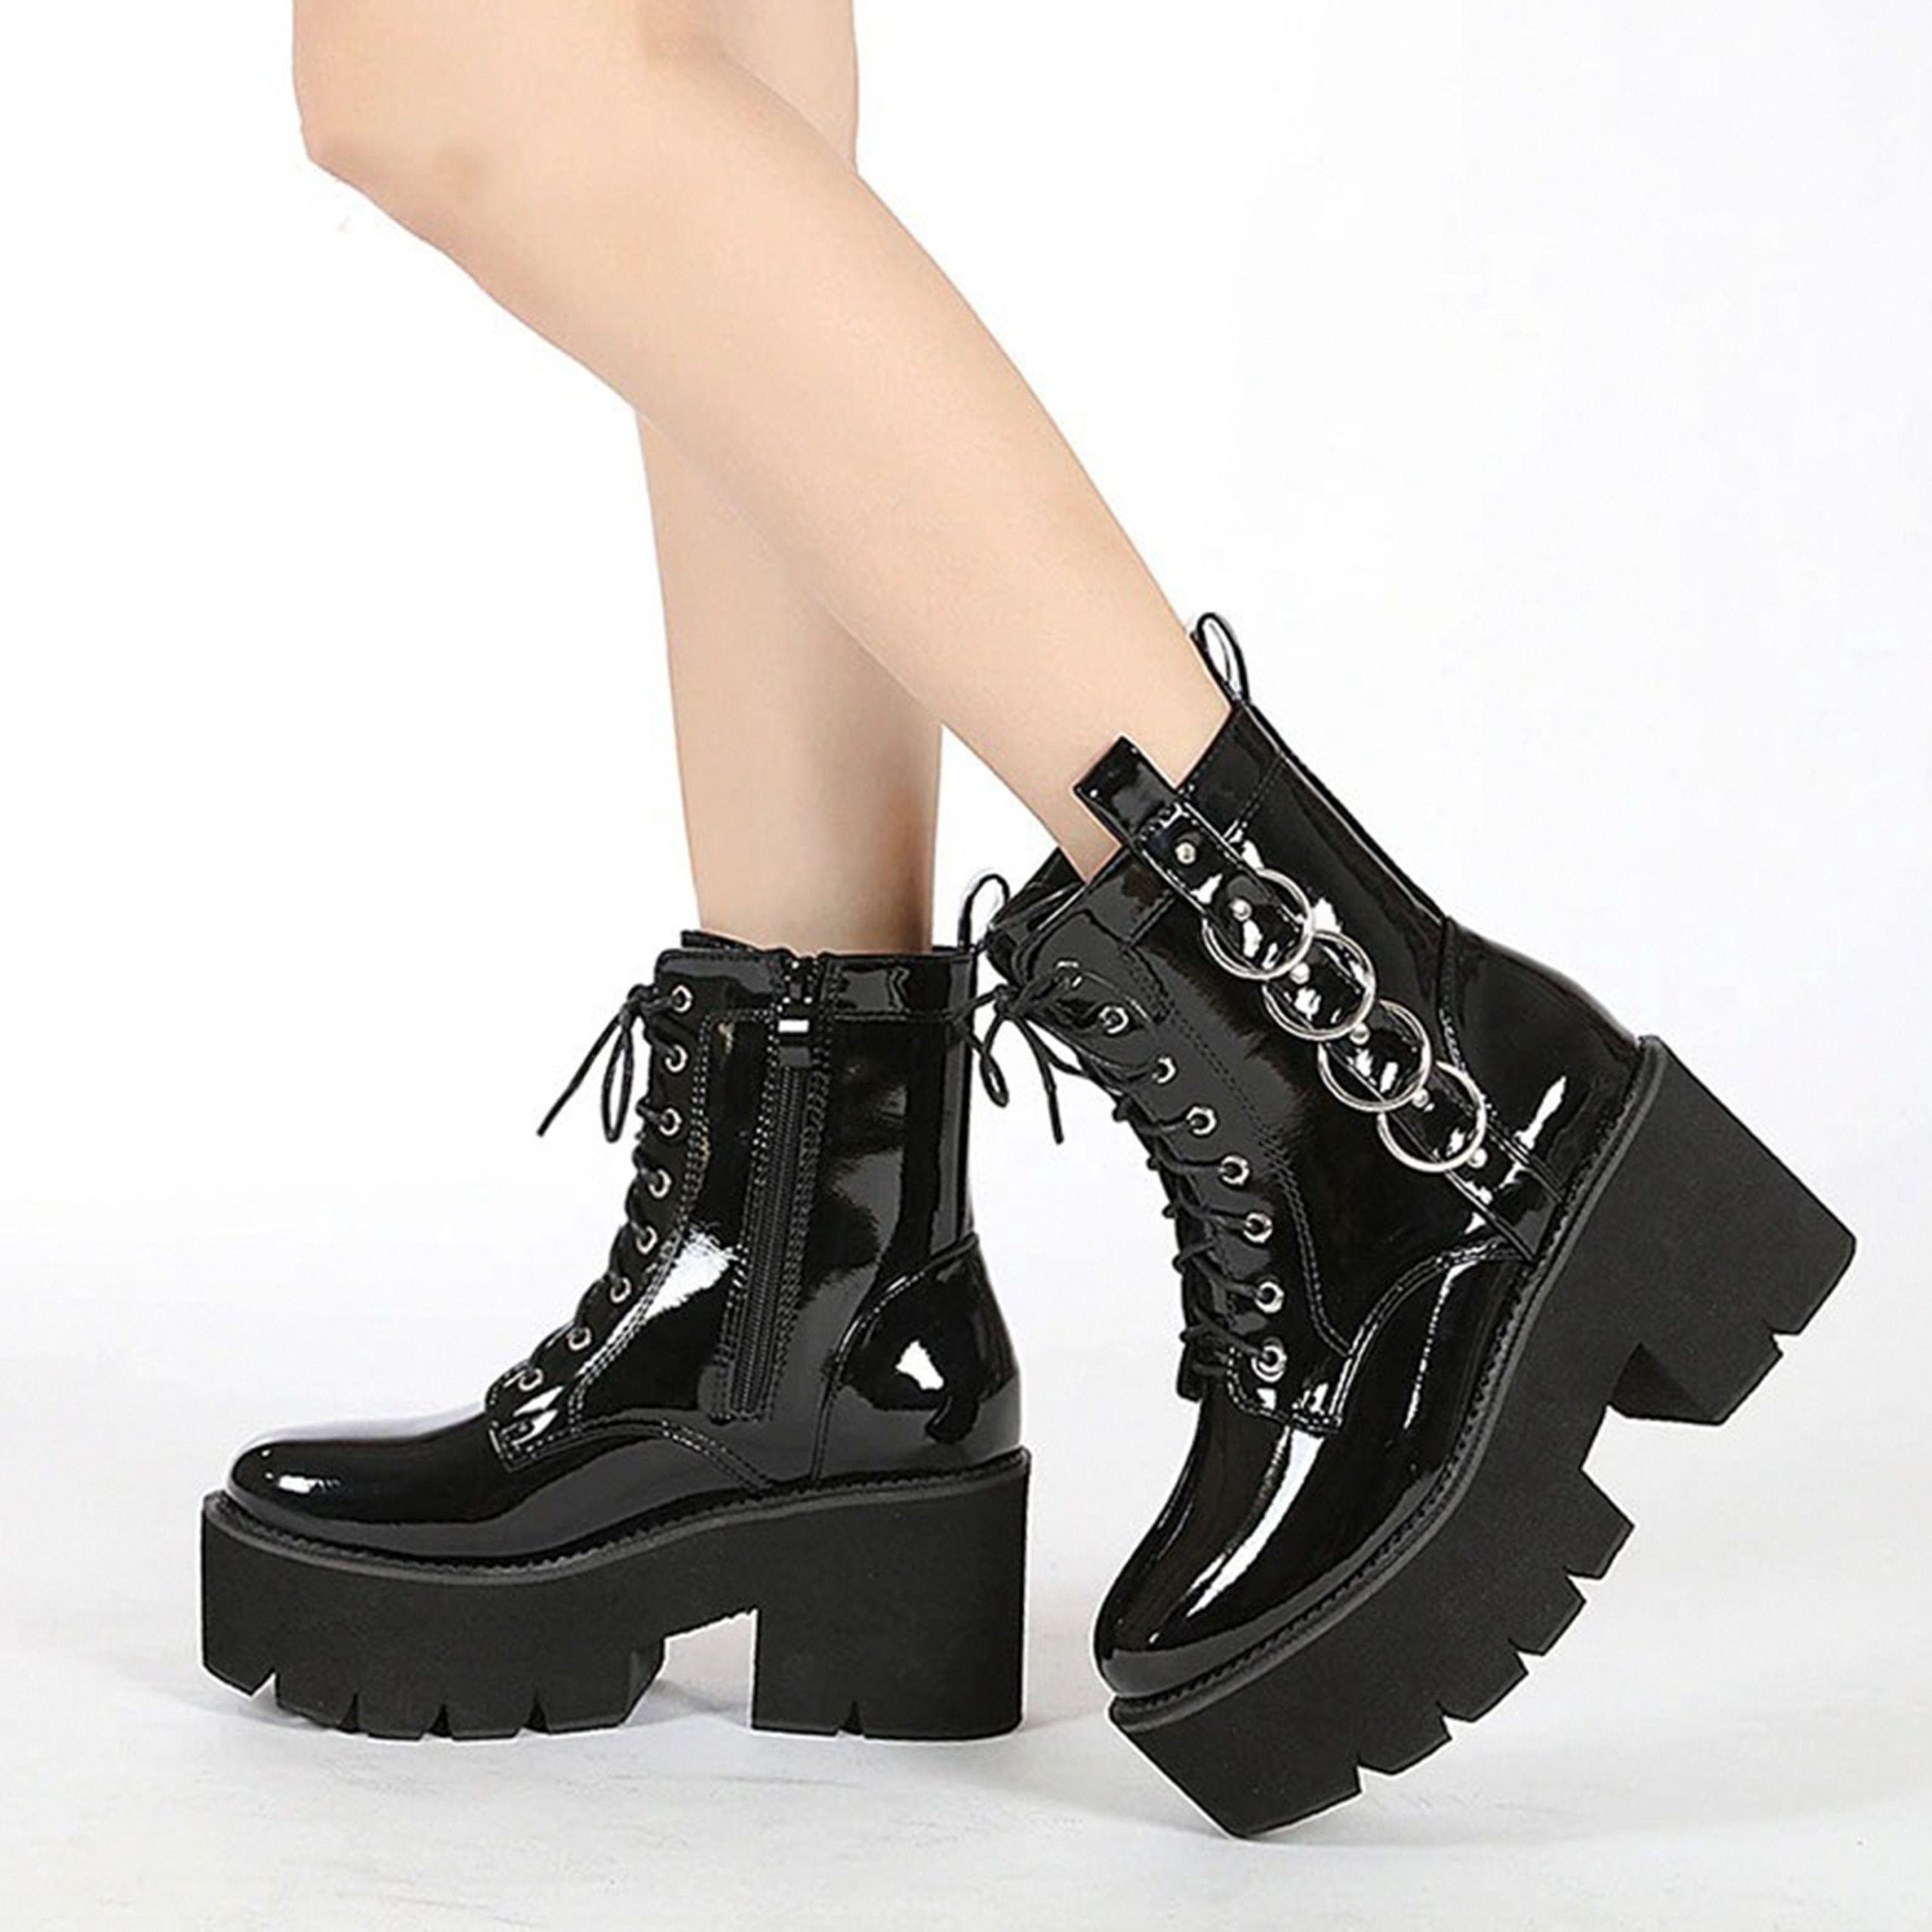 Motorcycle Boot Platform Boots Goth Platform Shoes Platform Shoes Chunky Shoes Gothic Boots Biker Boot High Heels Lace Up Shoes